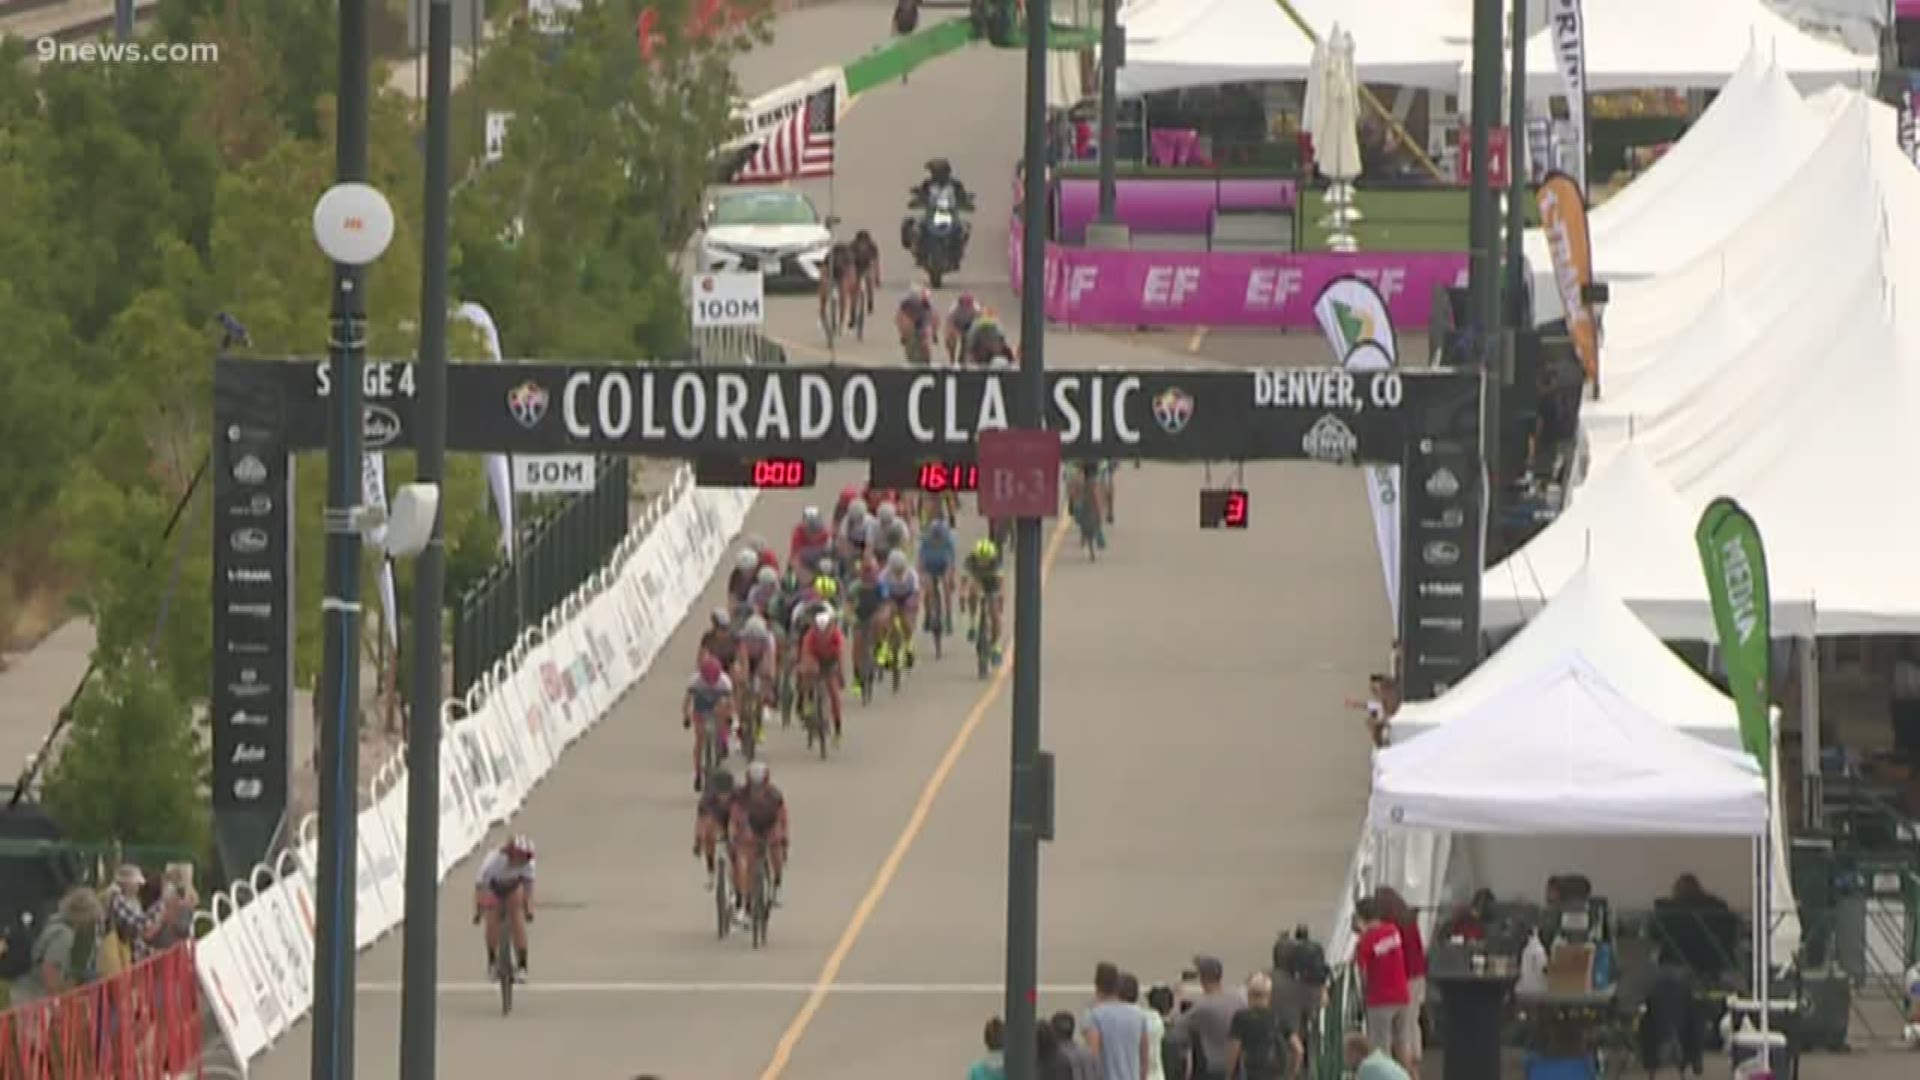 This weekend, the best female cyclists in the country and world will be in Colorado, racing through Steamboat Springs, Avon, Golden and Denver.